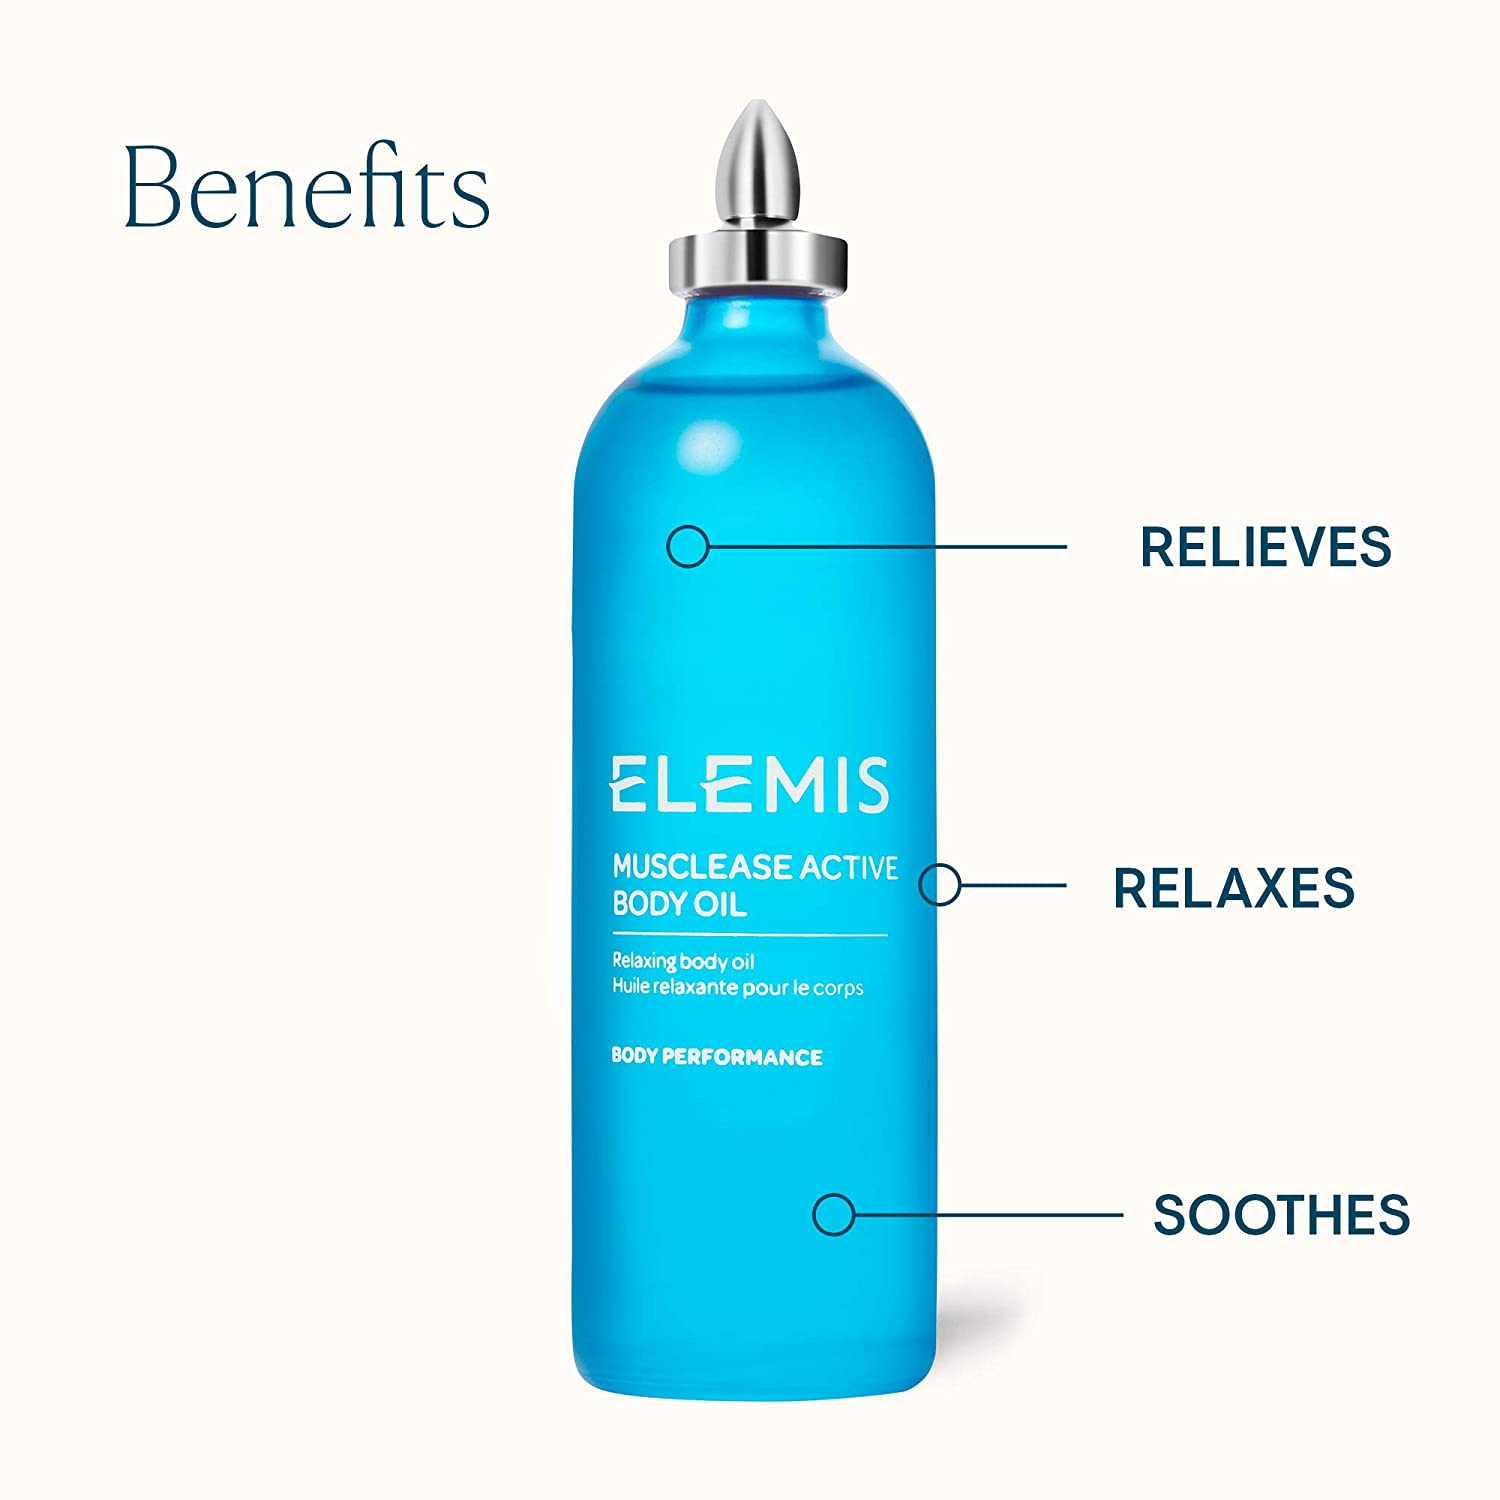 Elemis muscles active body & massage oil with benefits and body treatments shown